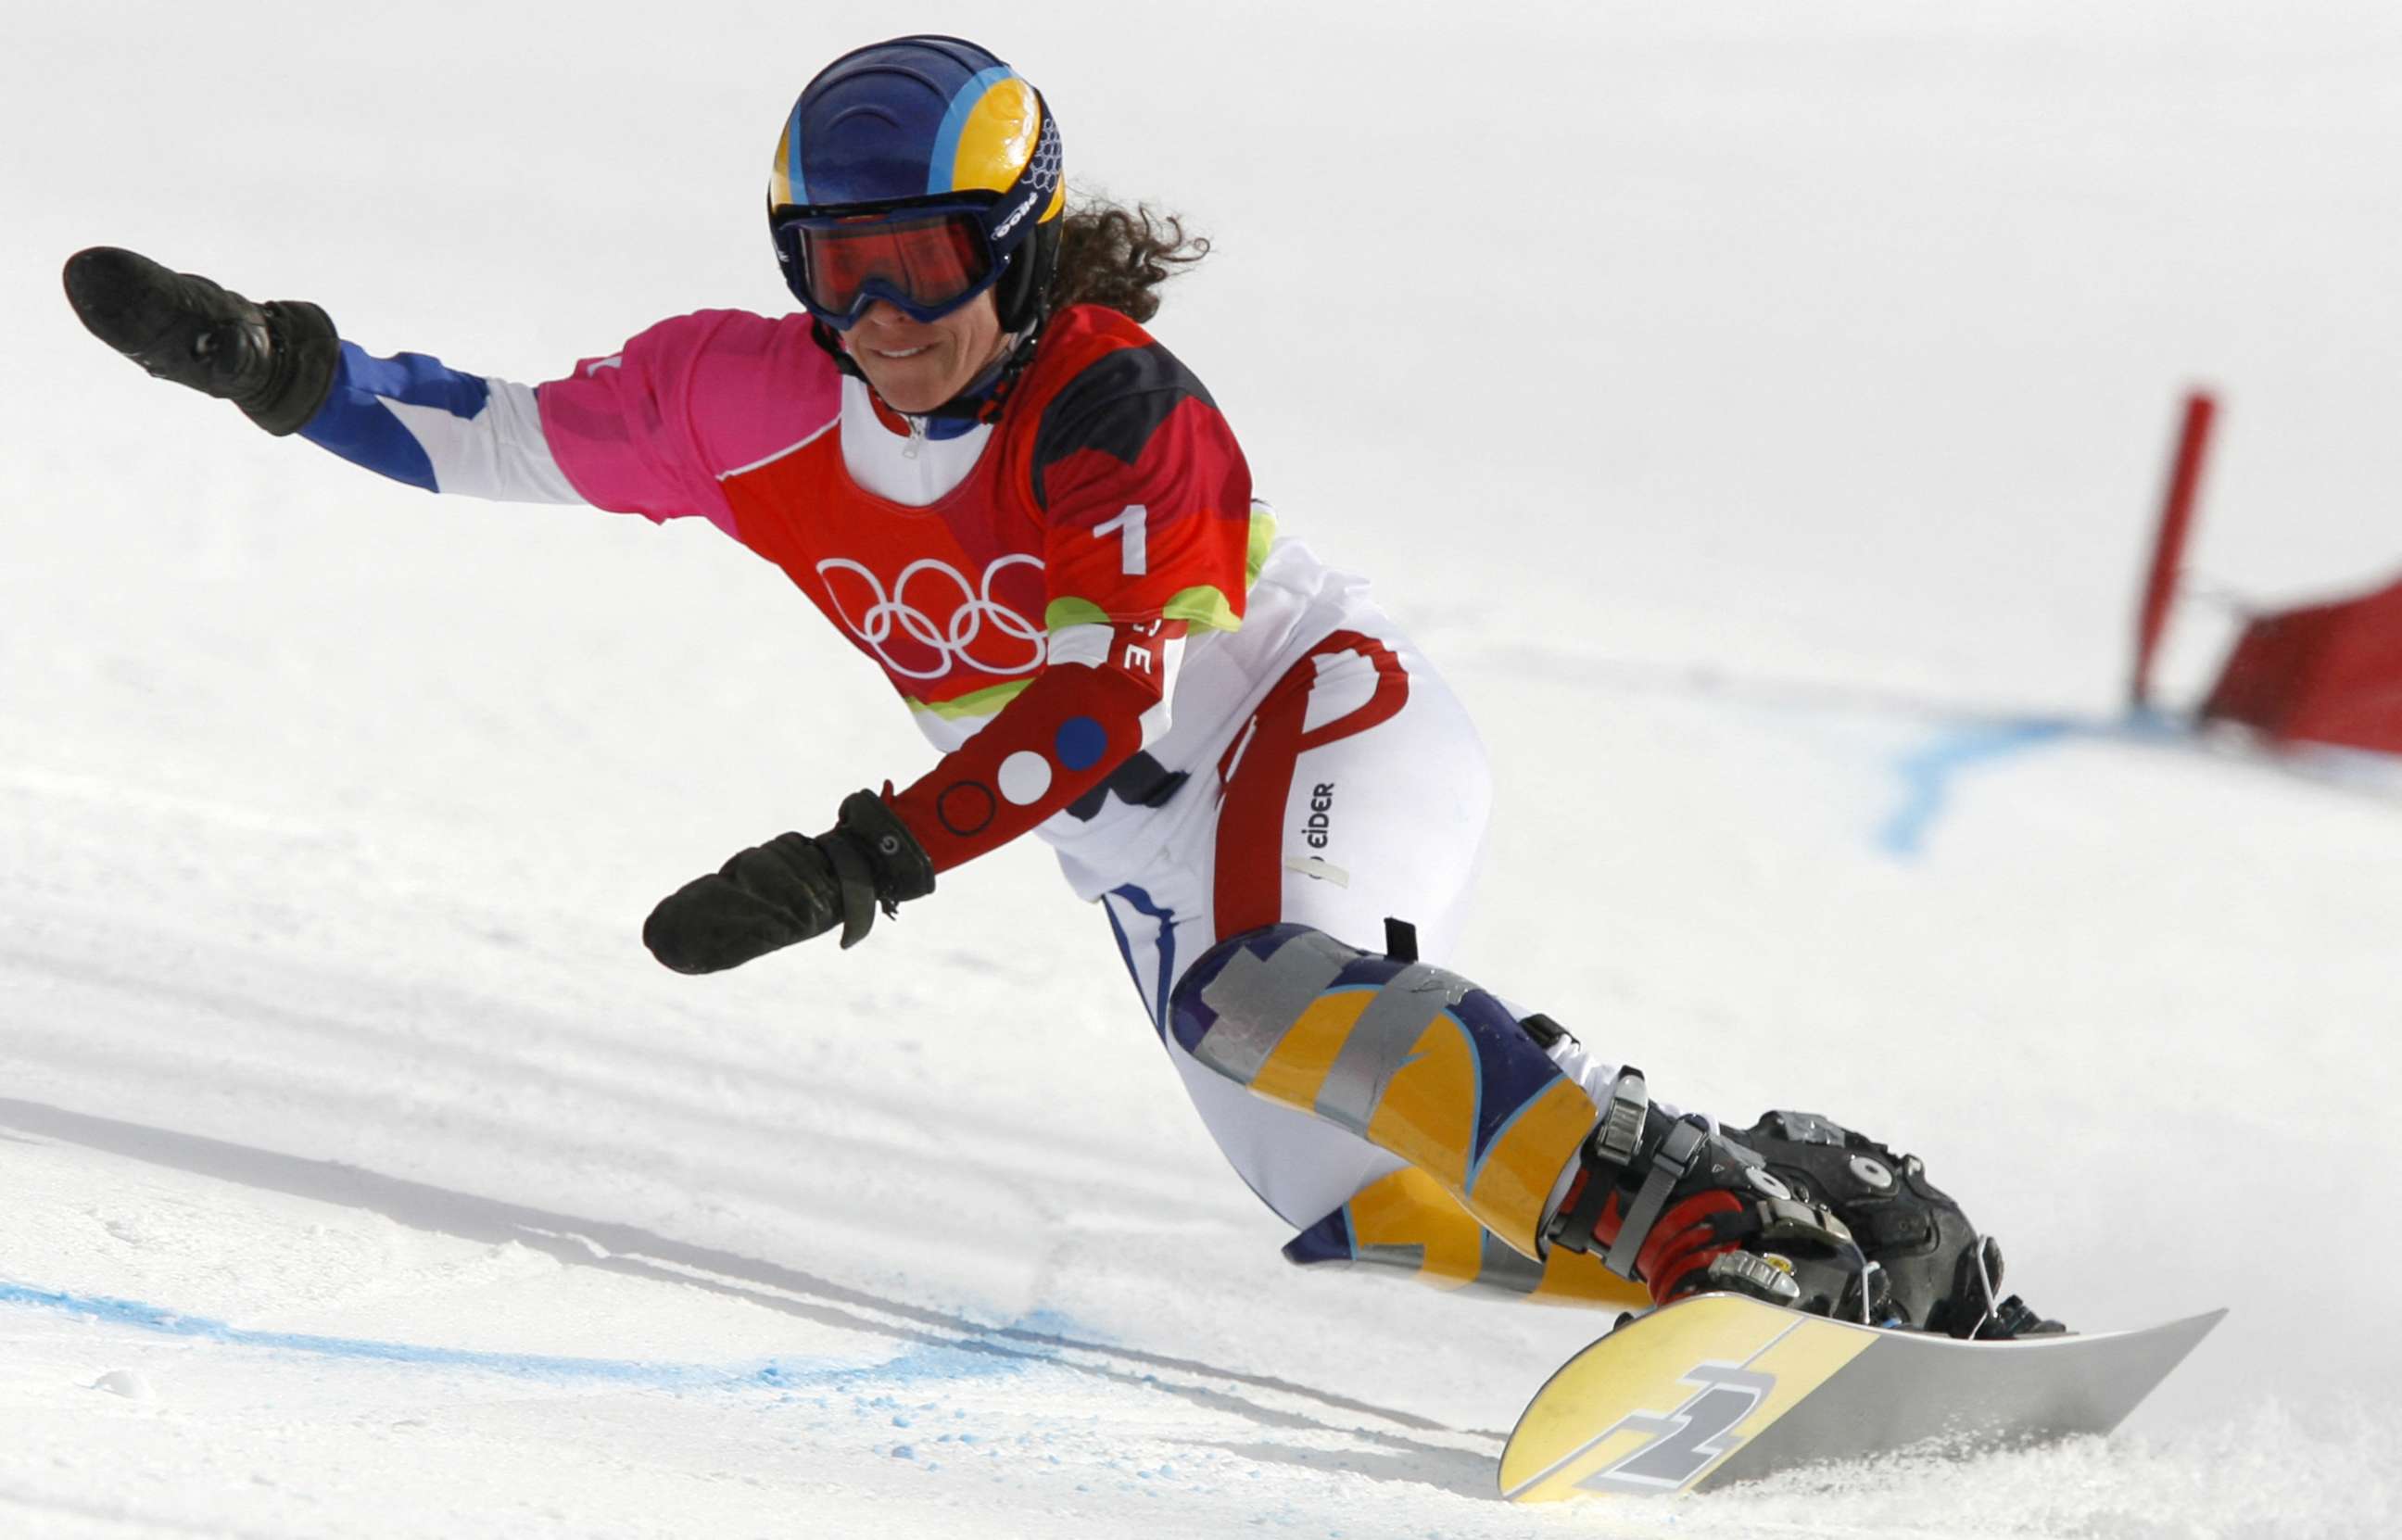 PHOTO: French snowboarder Julie Pomagalski speeds down the course while competing in the women's giant parallel slalom at the 2006 Winter Olympics in Turin, Italy, on Feb. 23, 2006.